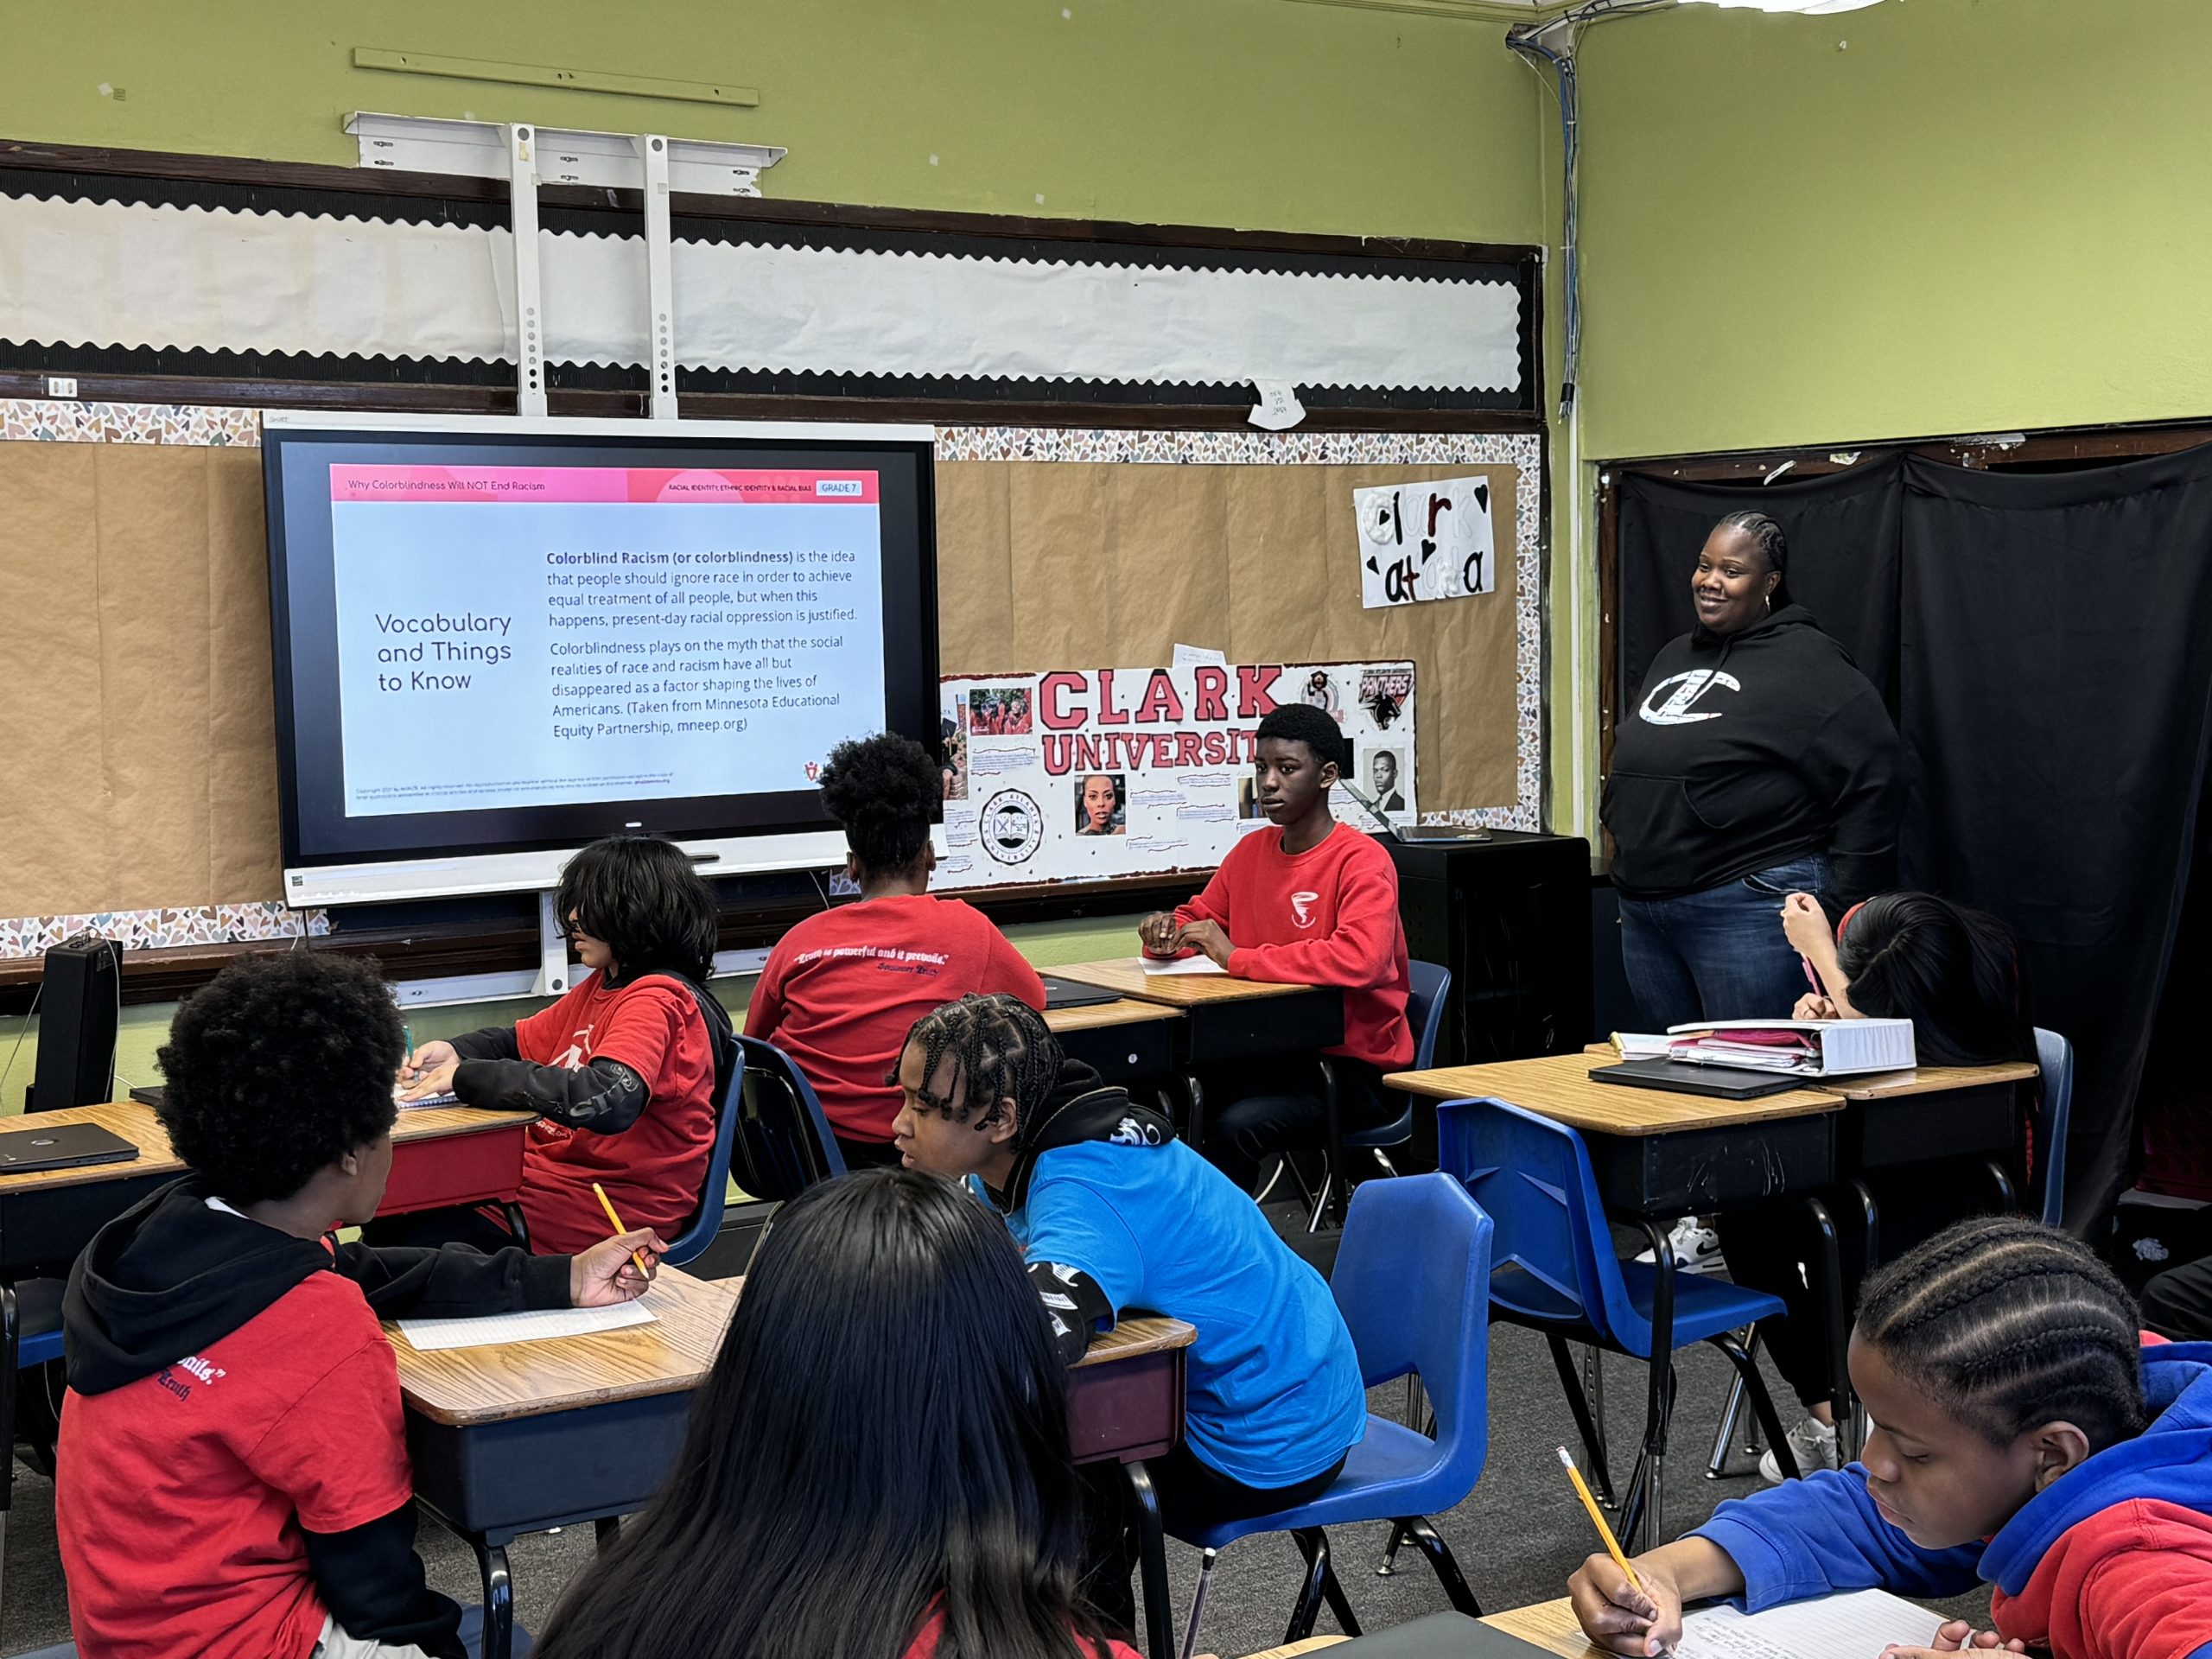 Evelyn Stevenson's 6th grade classroom during an AmazeWorks lesson, Why Colorblindness Will NOT End Racism." Students wearing red sweatshirts are seated at their desks listening to Evelyn, who stands at the front of the room.